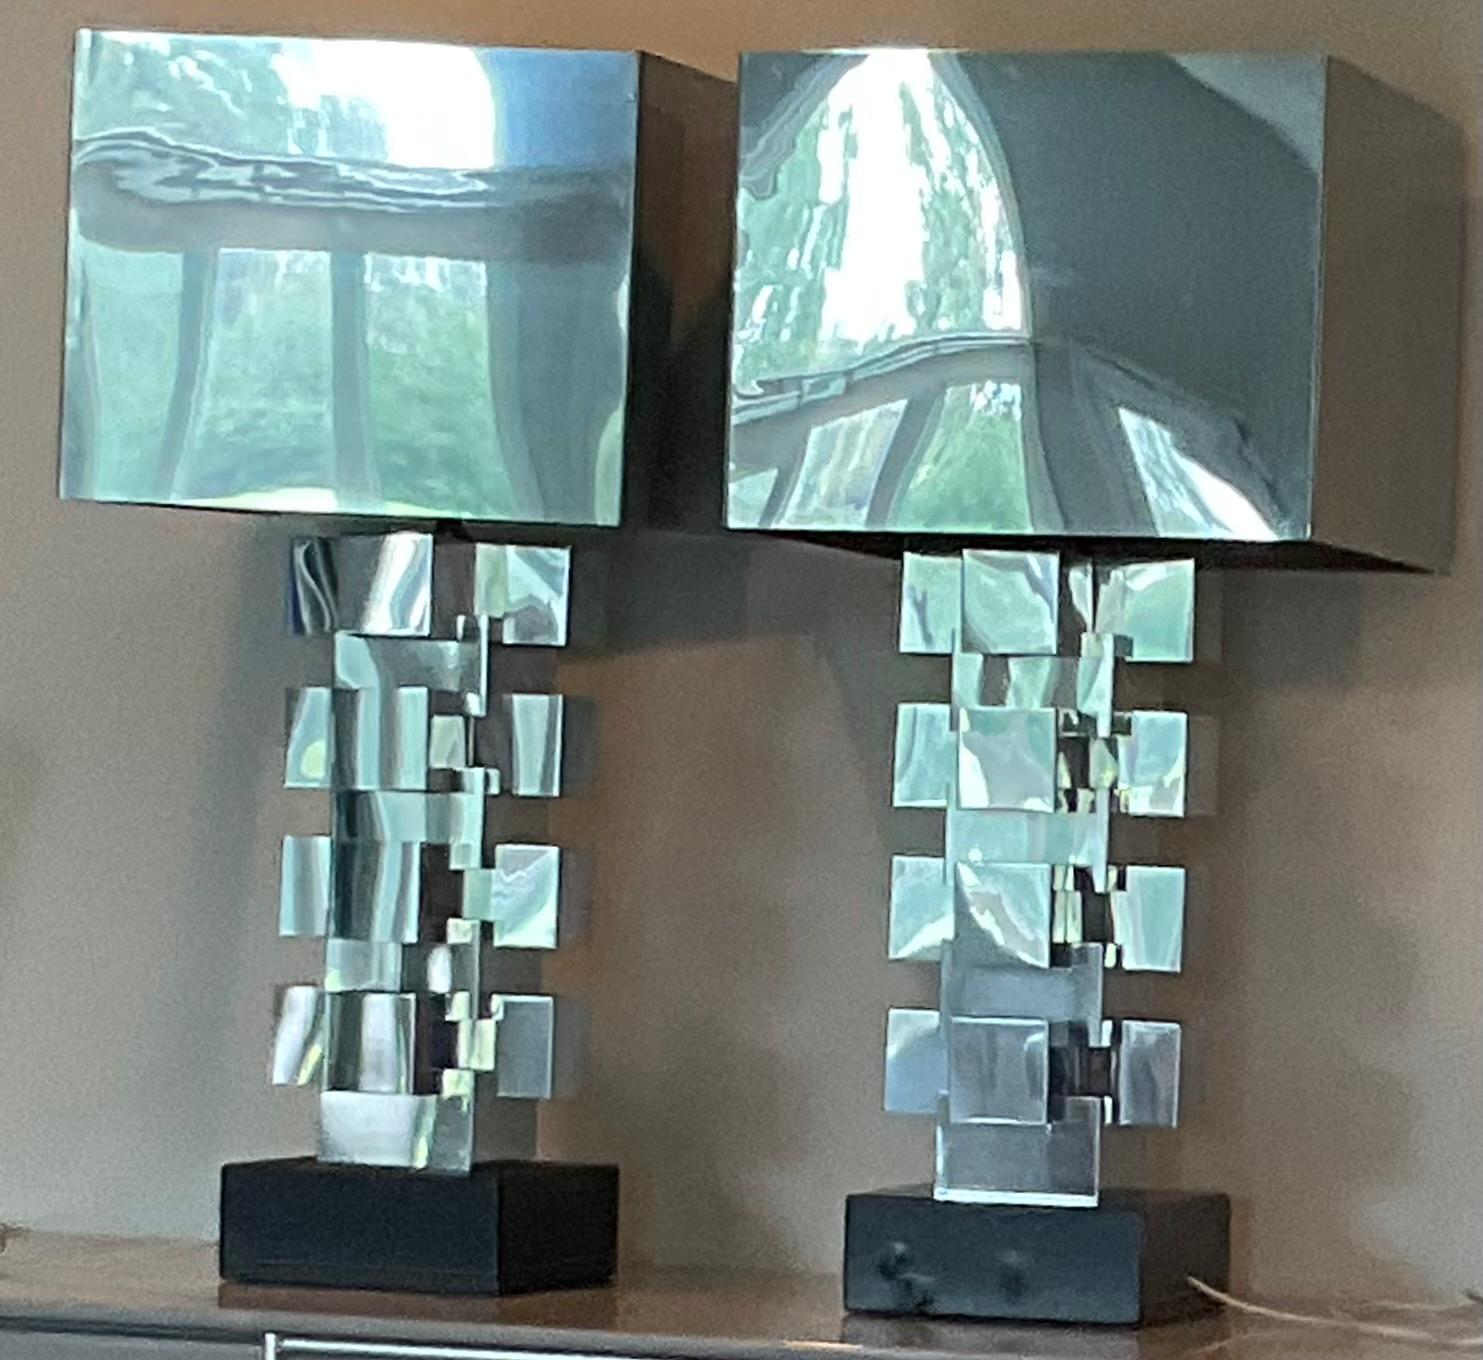 MONUMENTAL Pair of Curtis Jere Skyscraper Lamps in Chrome with Original chrome shades. Signed with original plaque. These lamps are monumental in person and light within the lamp, as well as, in the harp. 